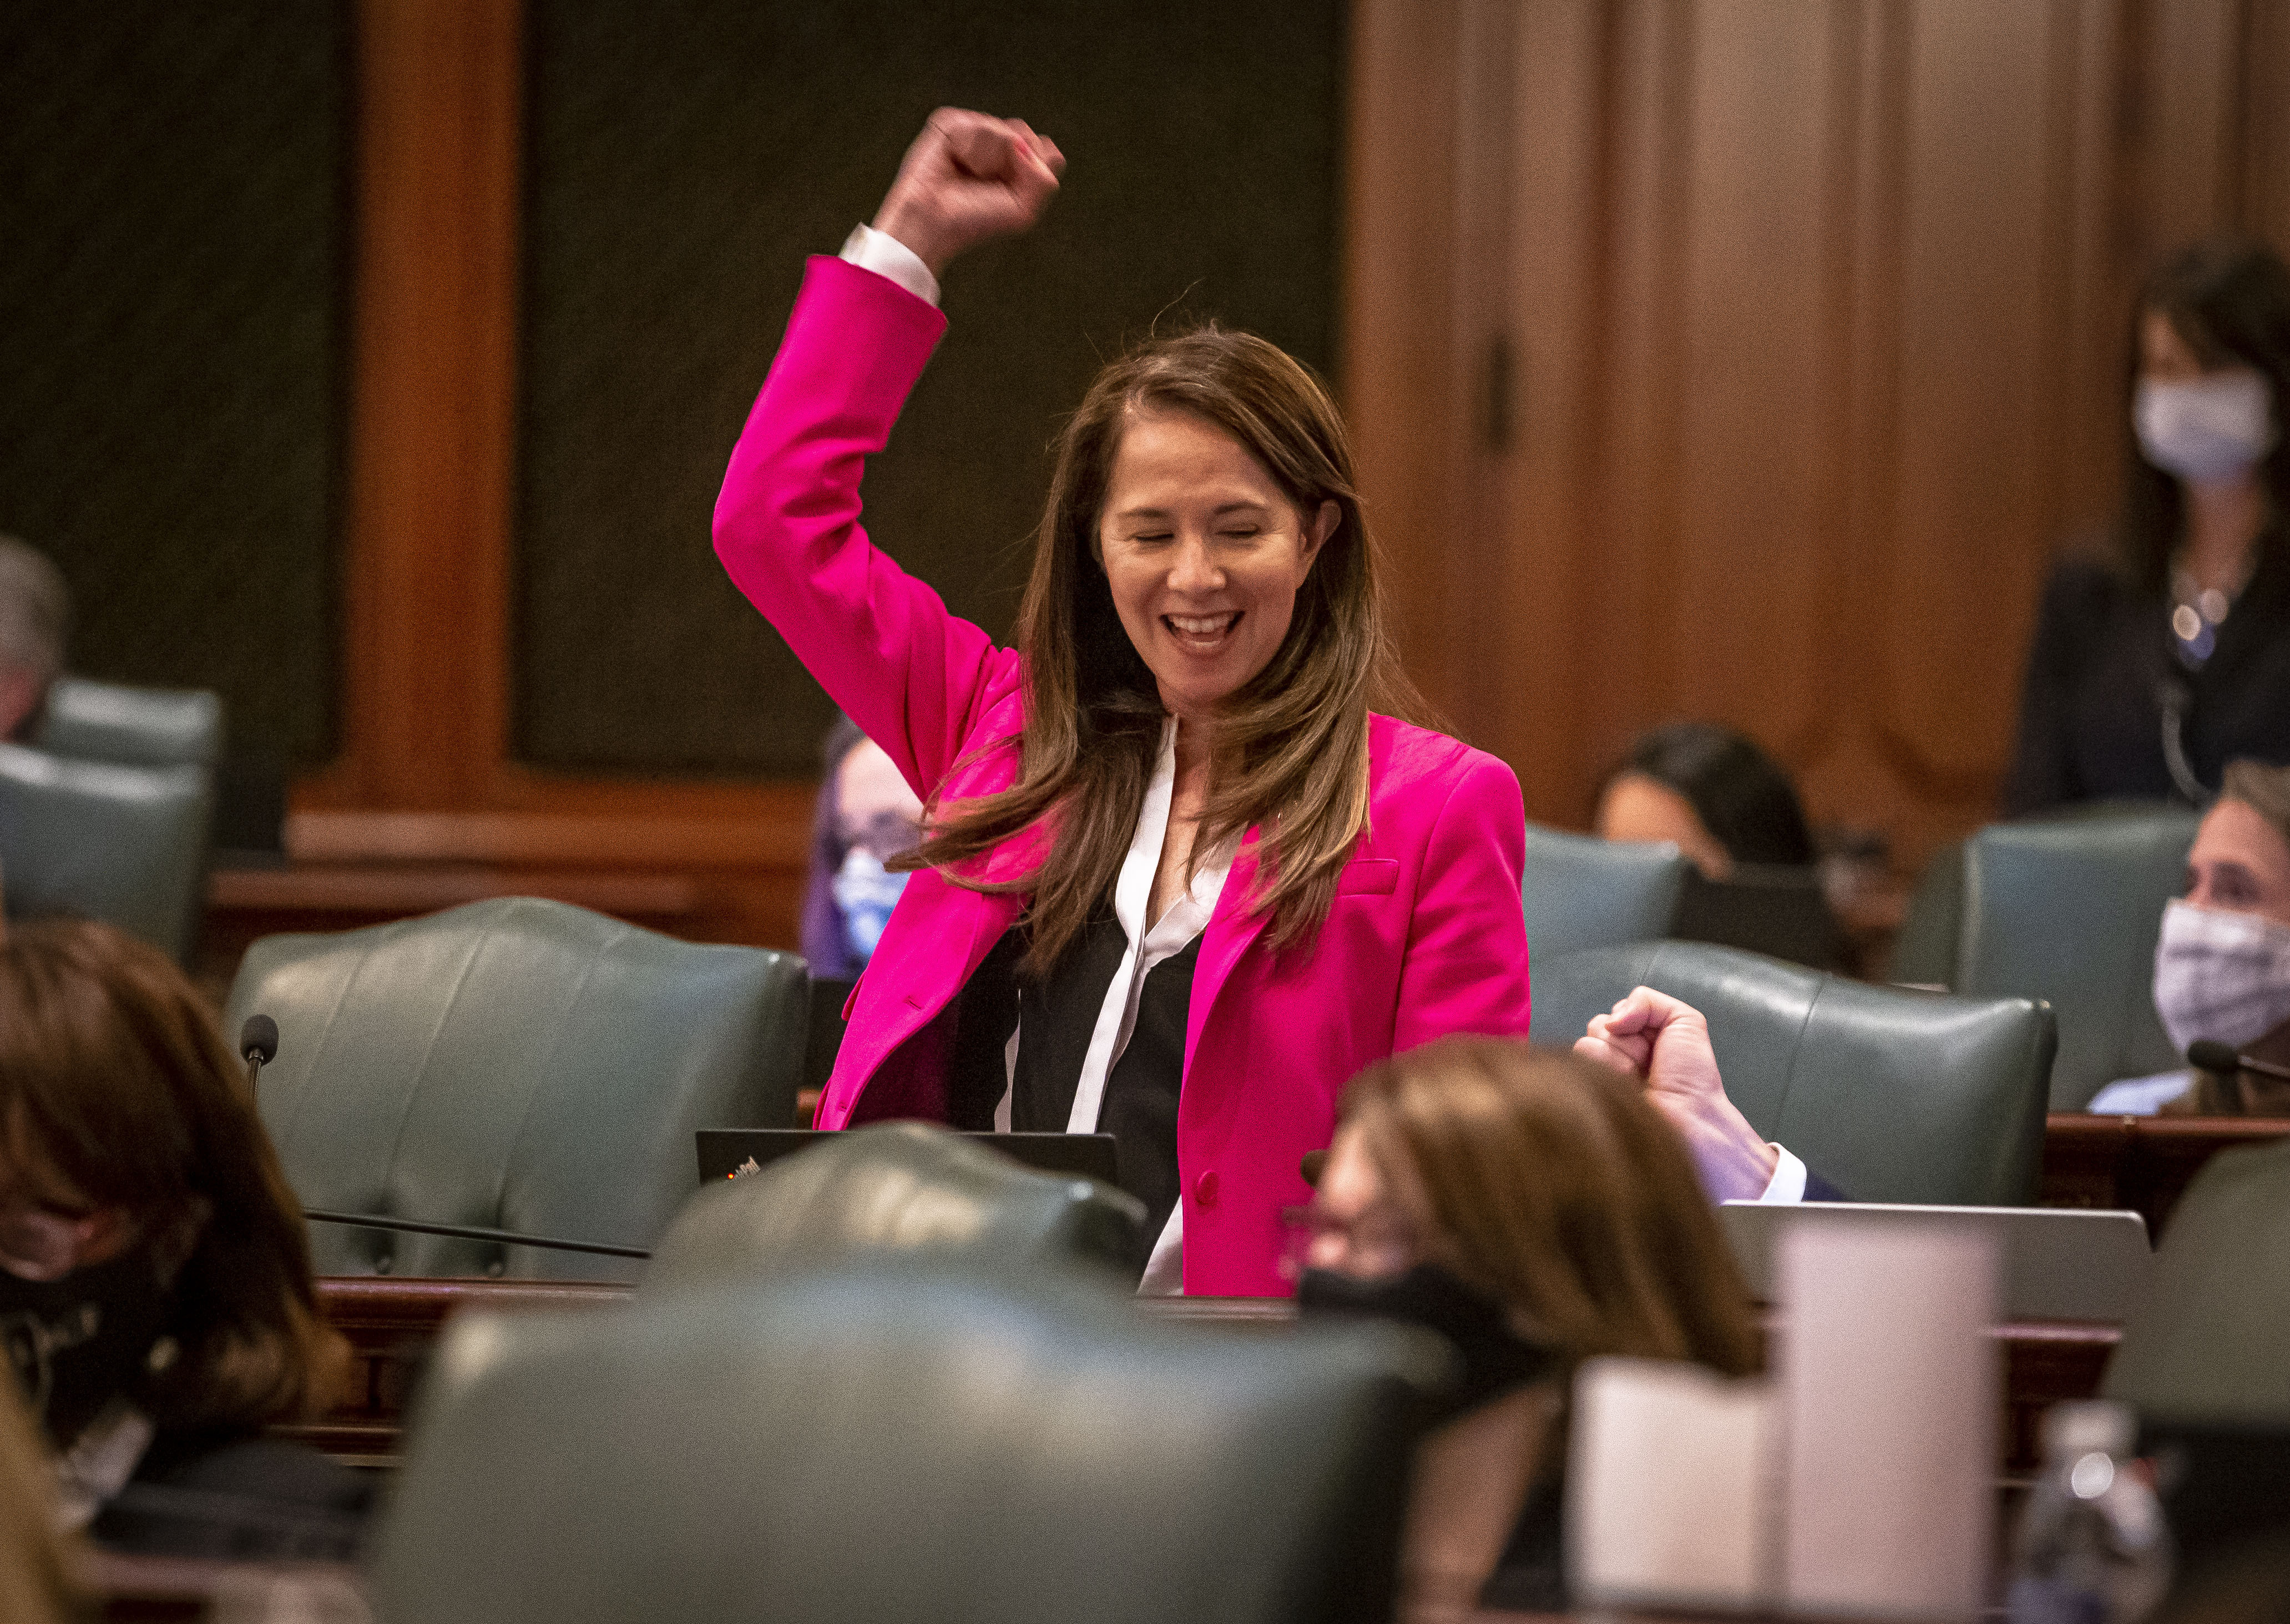 Illinois State Rep. Jennifer Gong-Gershowitz, D-Glenview, celebrates passage of a bill that requires public schools to teach Asian American history, on the floor of the Illinois House of Representatives in Springfield, Ill., on May 31, 2021. (Justin L. Fowler—State Journal-Register/AP)